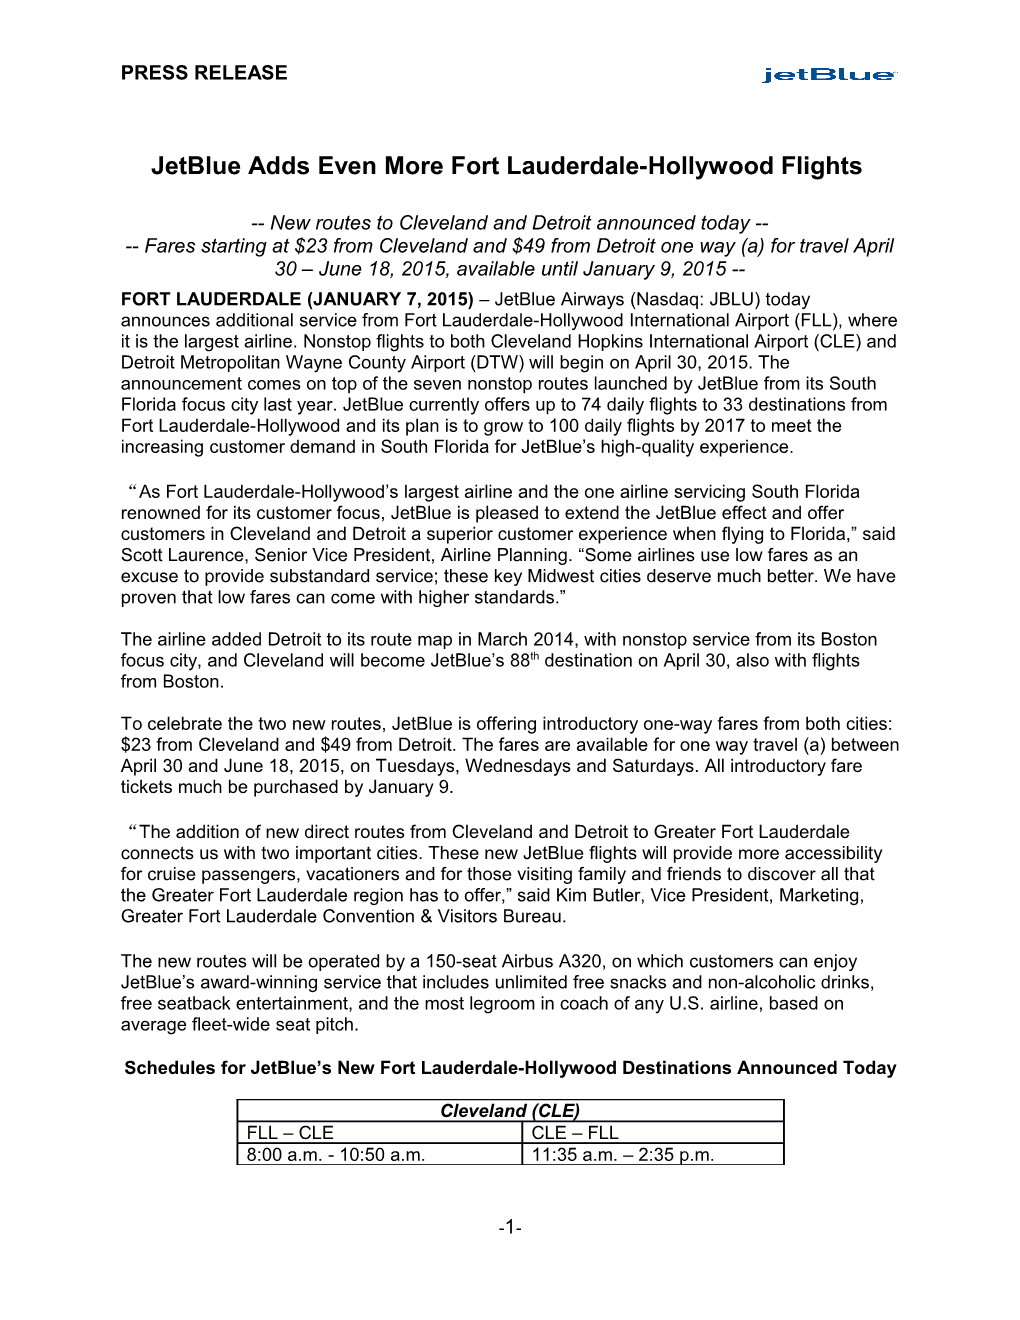 Jetblue Adds Even More Fort Lauderdale-Hollywood Flights